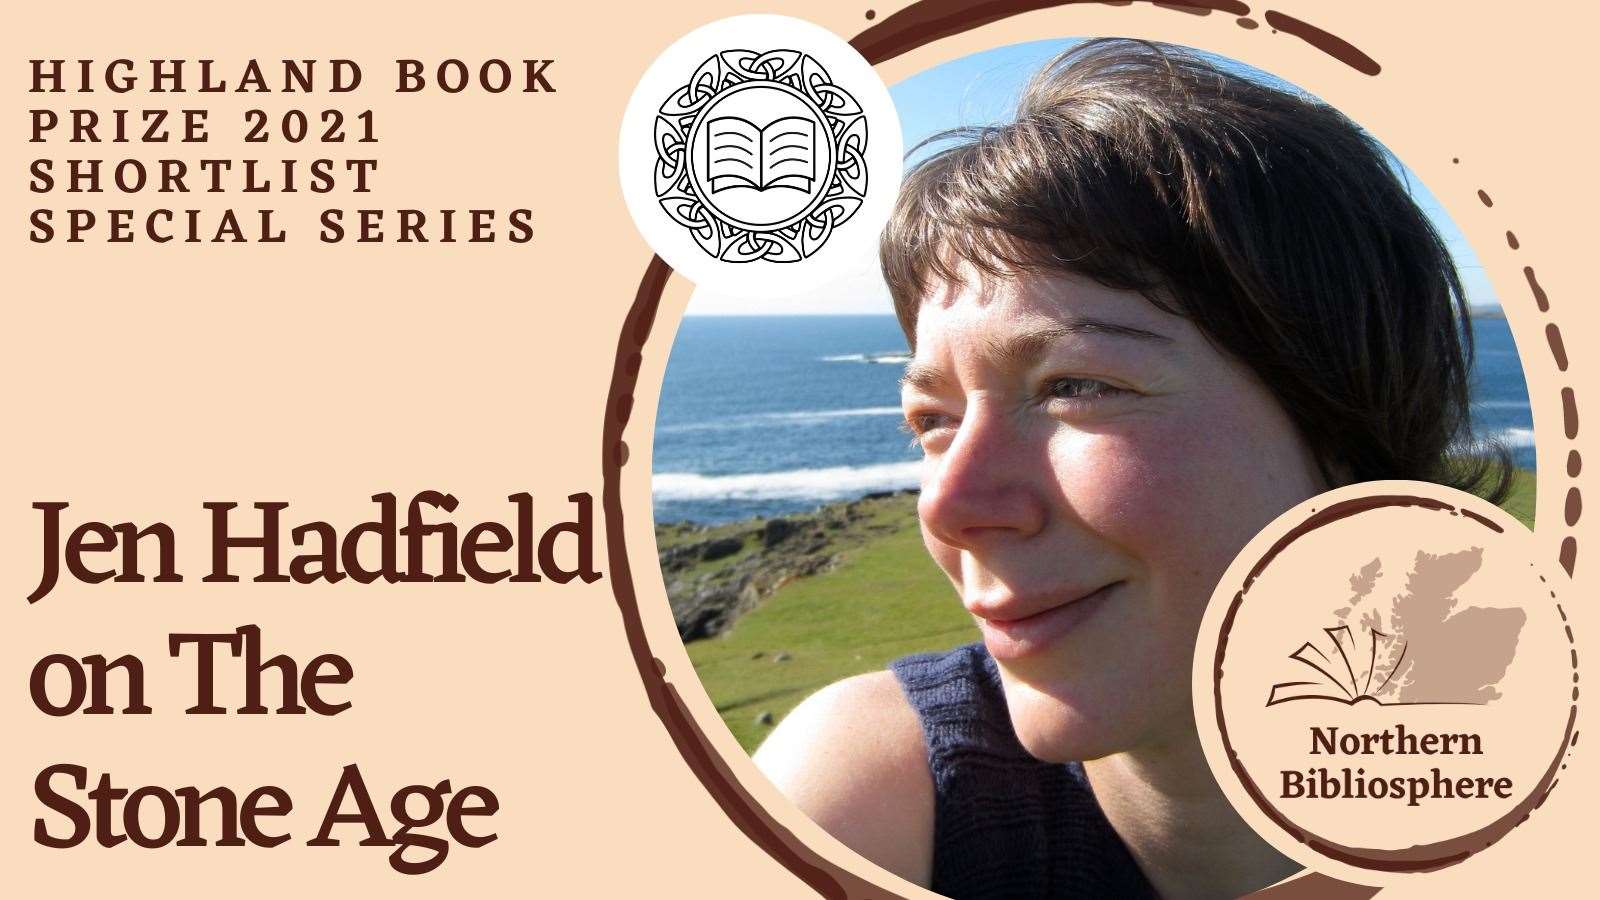 The new episode of Northern BIbliosphere will welcome Jen Hadfield as guest.